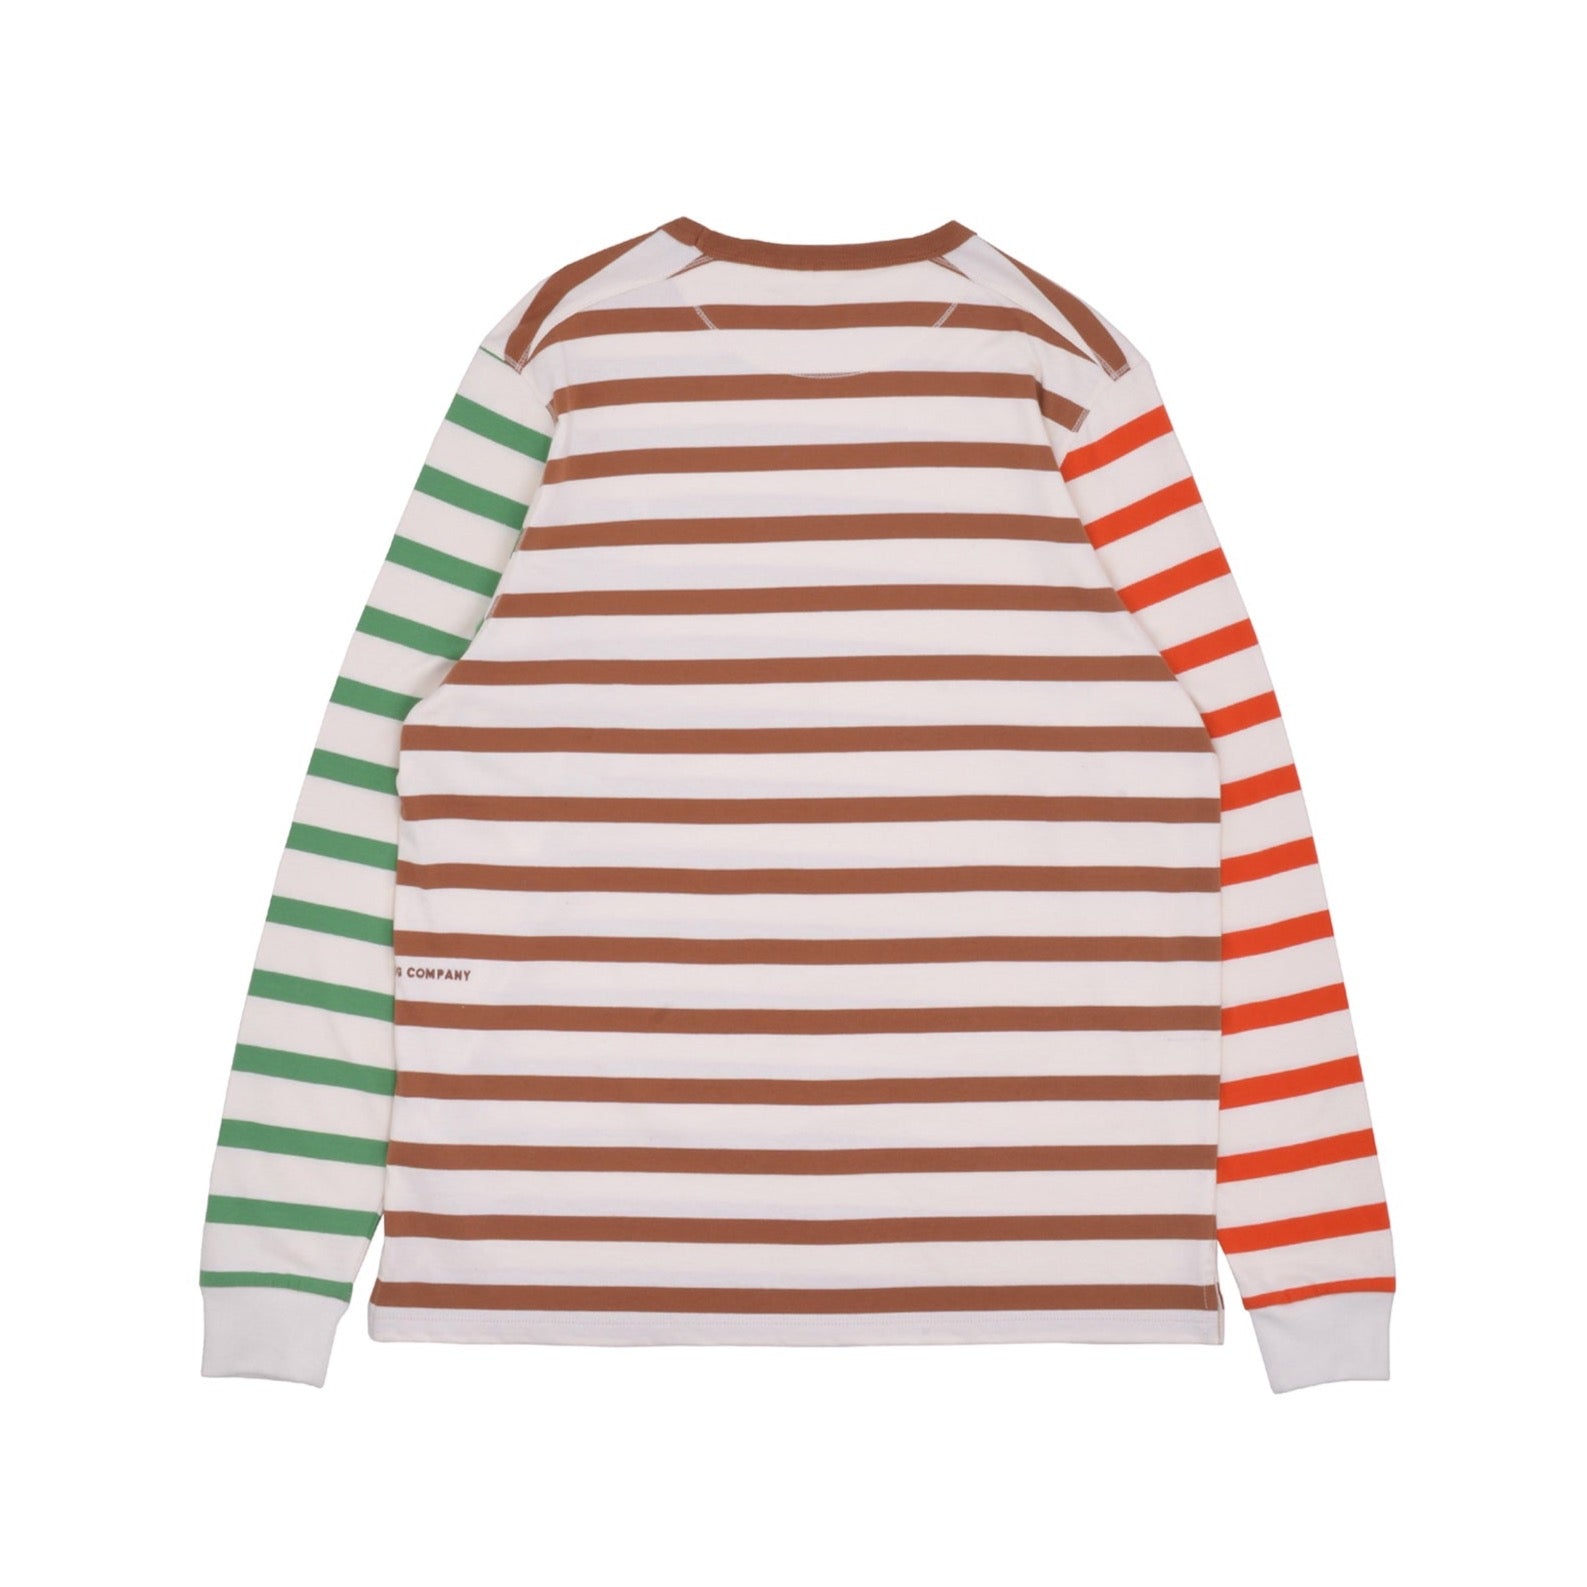 Miffy Embroidered Striped Longsleeve T-shirt